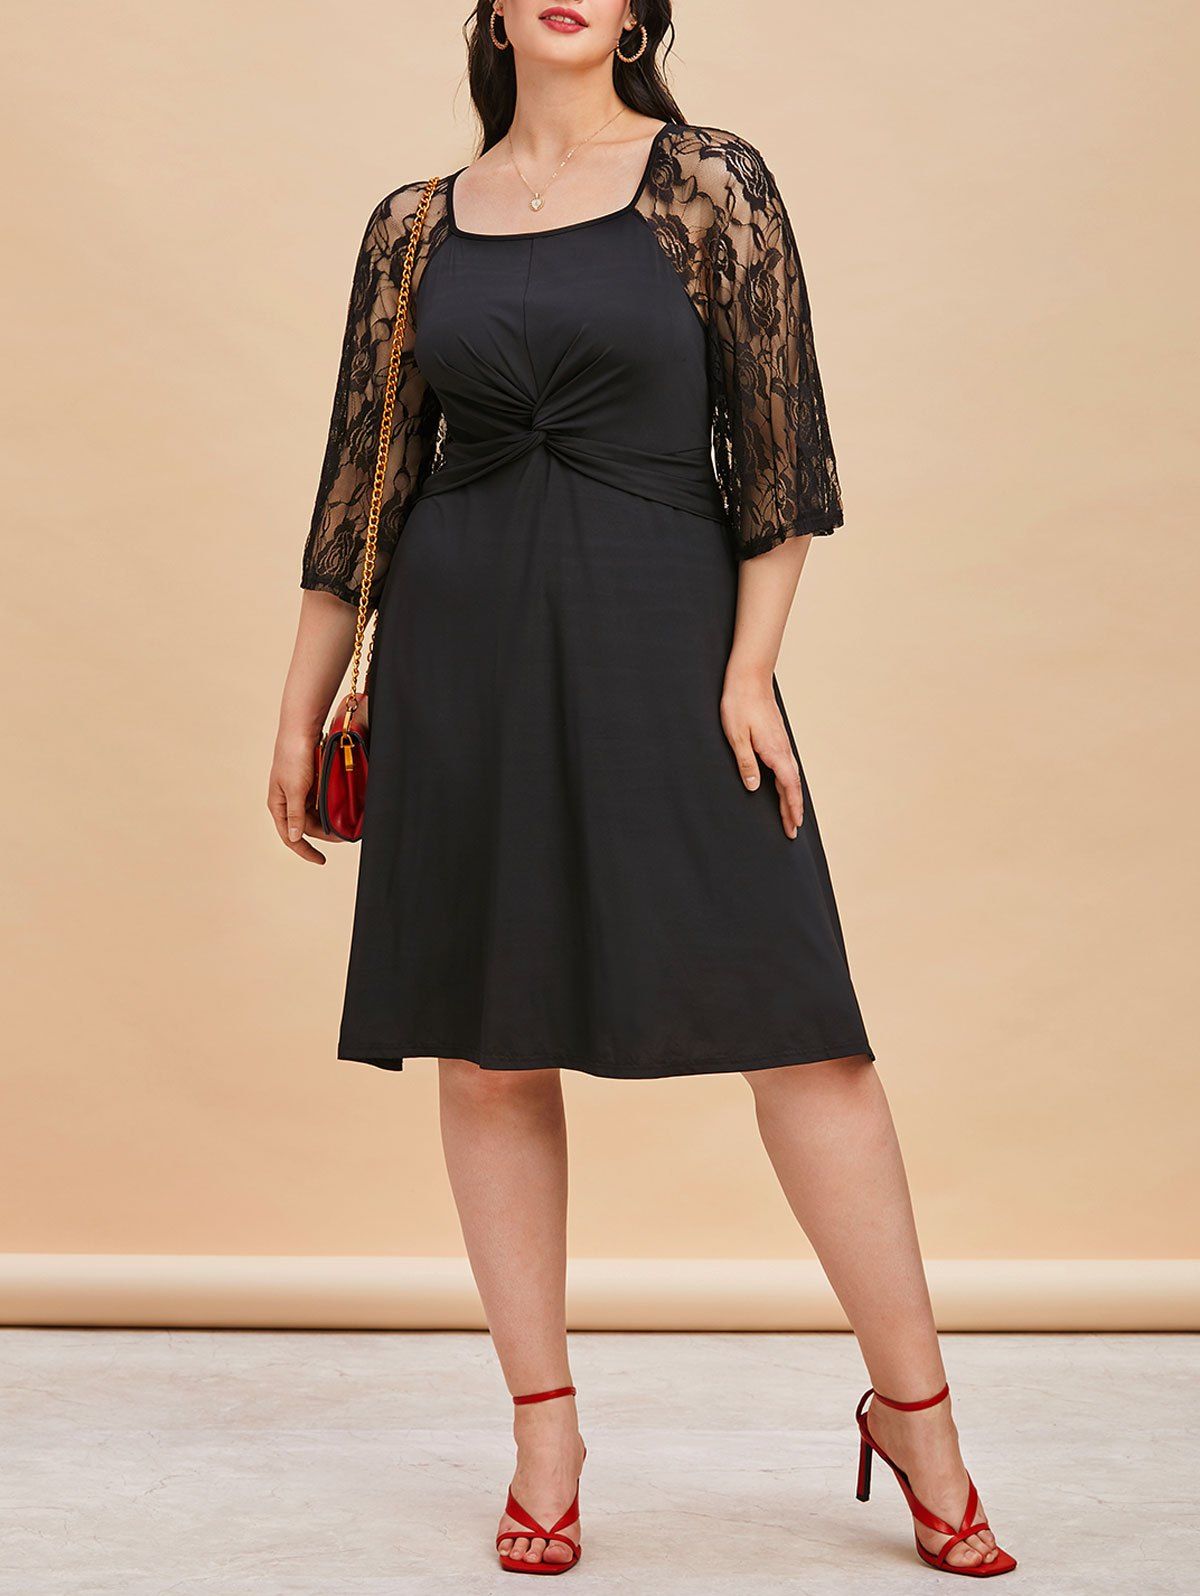 Plus Size Lace Insert Sheer Twisted Dress - BLACK 3X